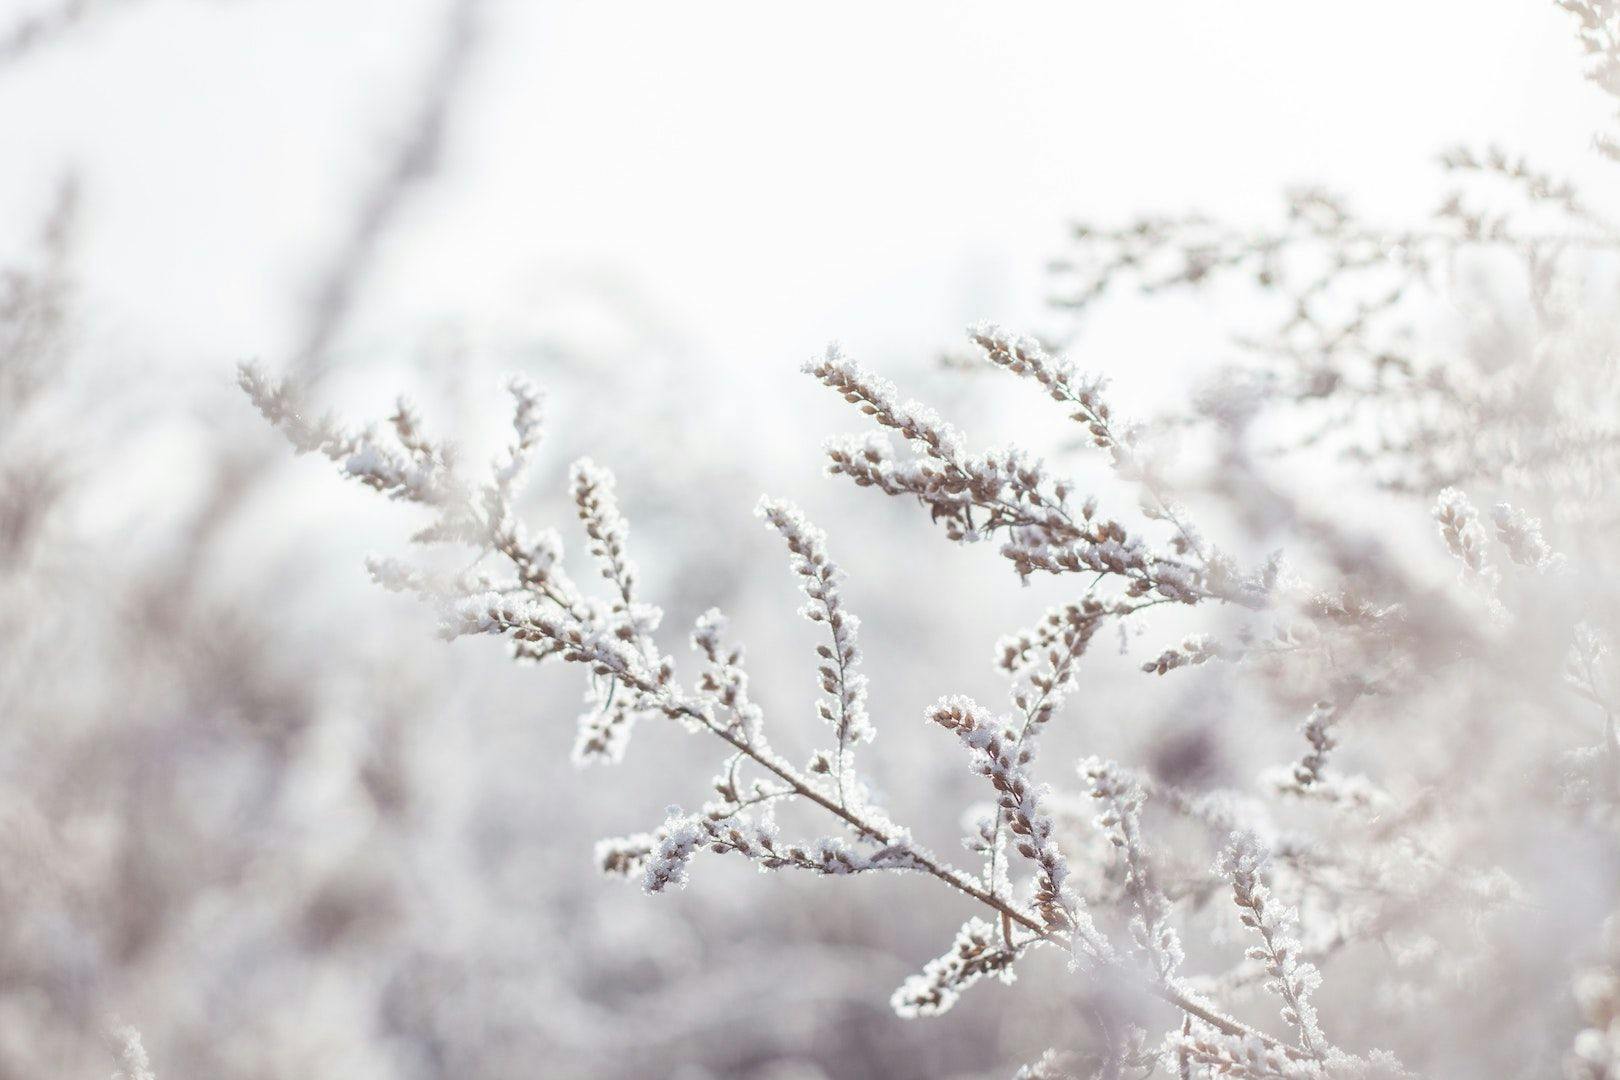 Discover the wellbeing benefits of living seasonally: winter edition